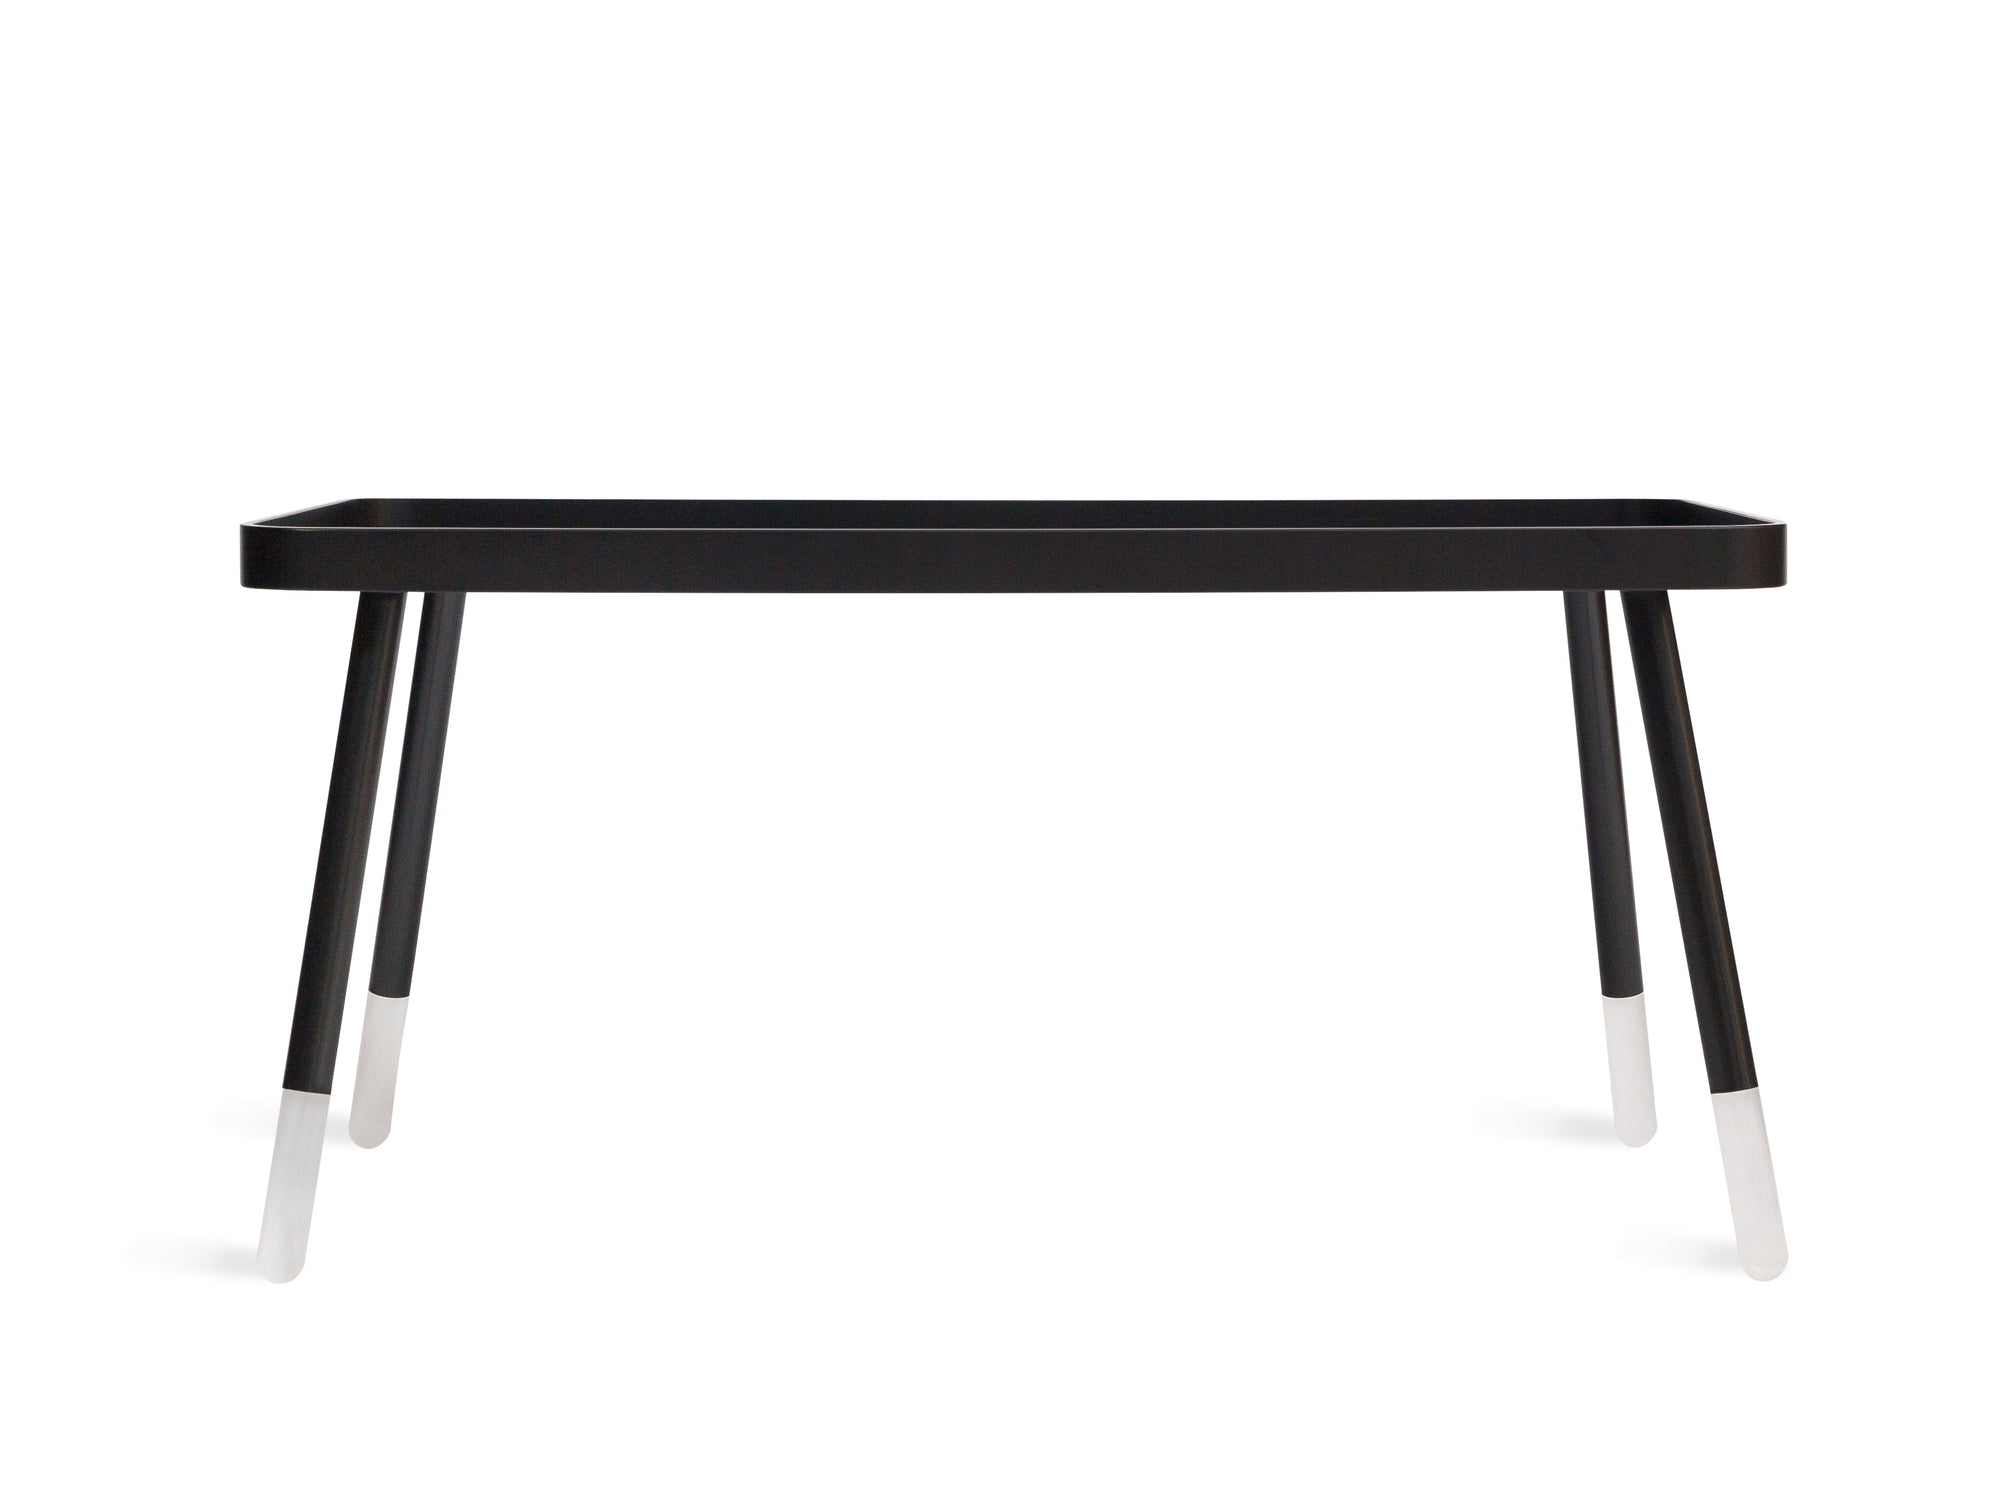 Slim Special Table - The Everset